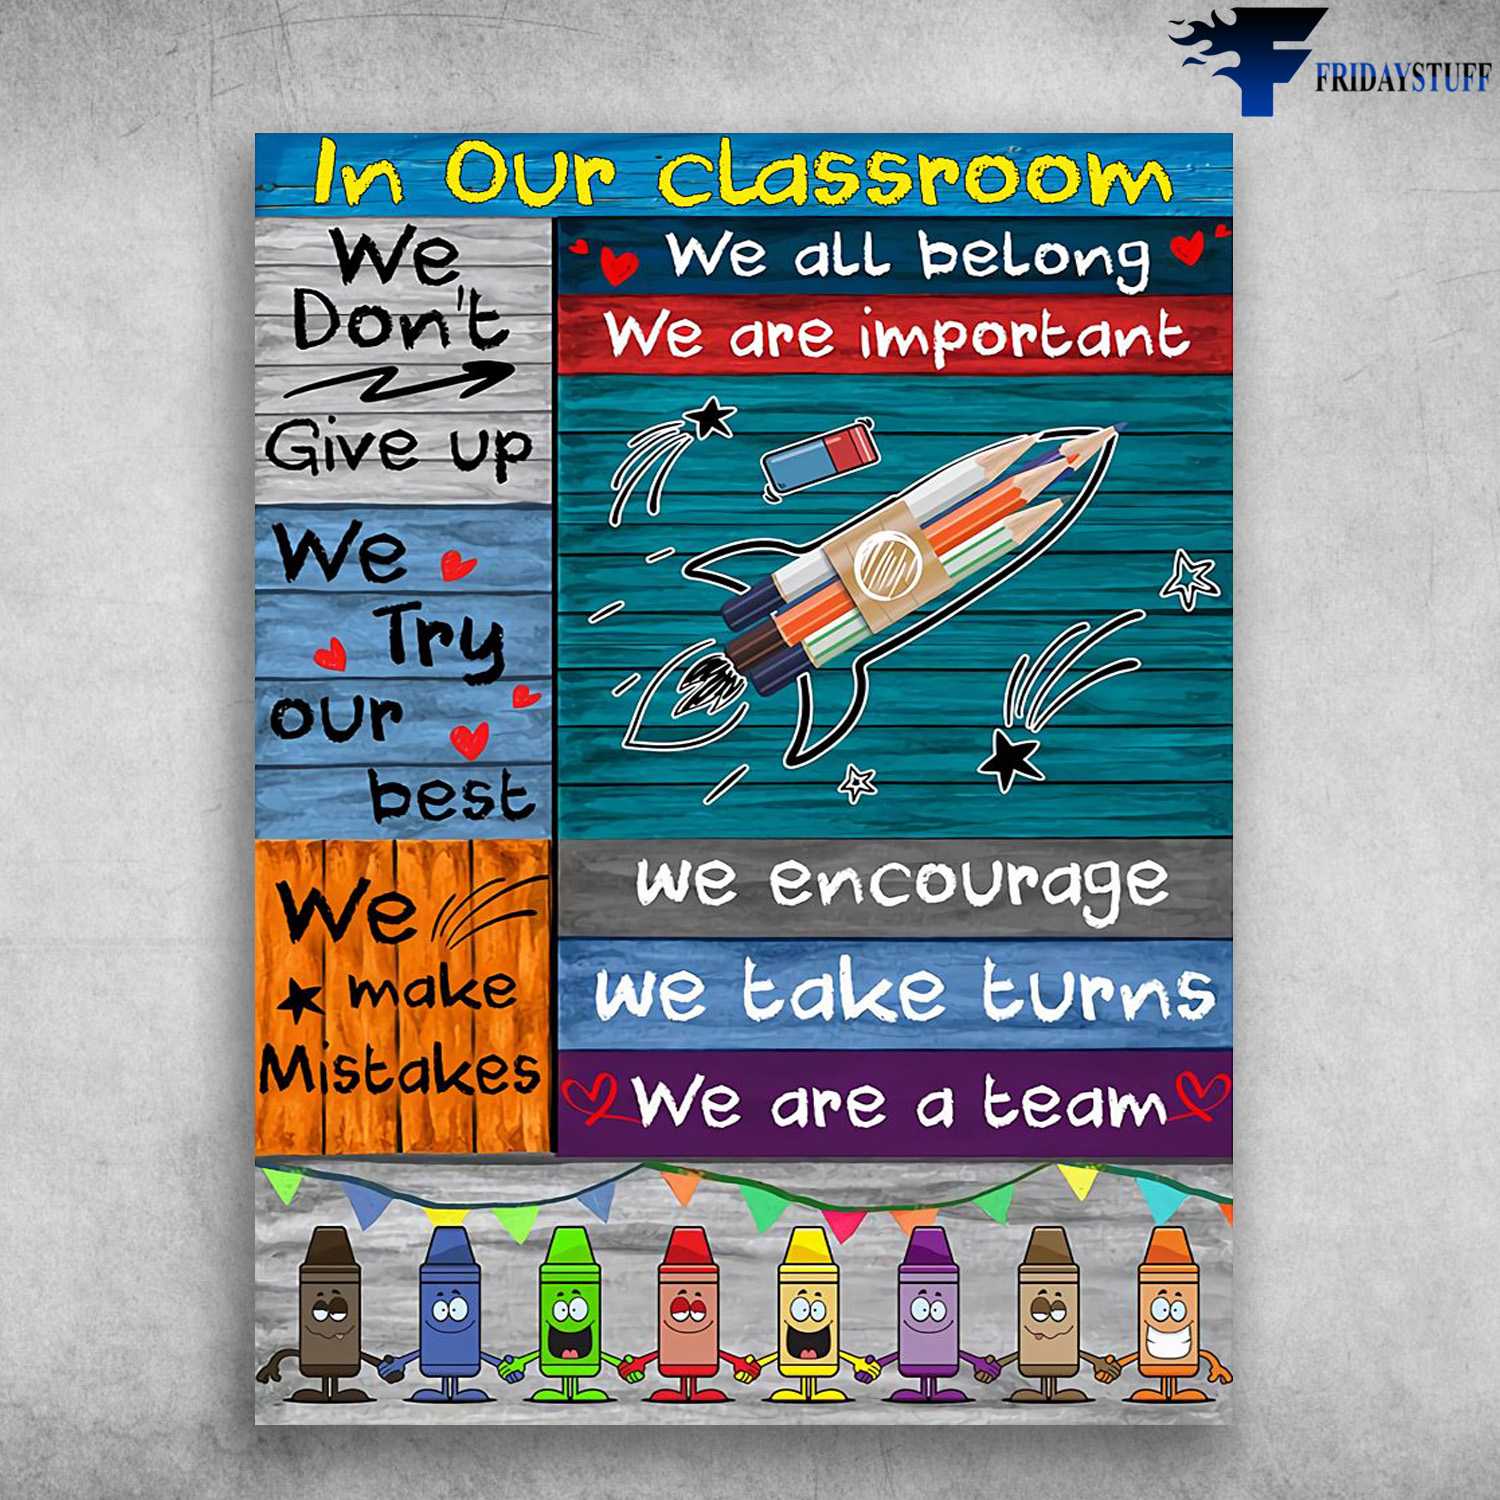 Classroom Poster, In Our Classroom, We Don't Give Up, We Try Our Best, We Make Mistakes, We All Belong, We Are Important, We Encourage